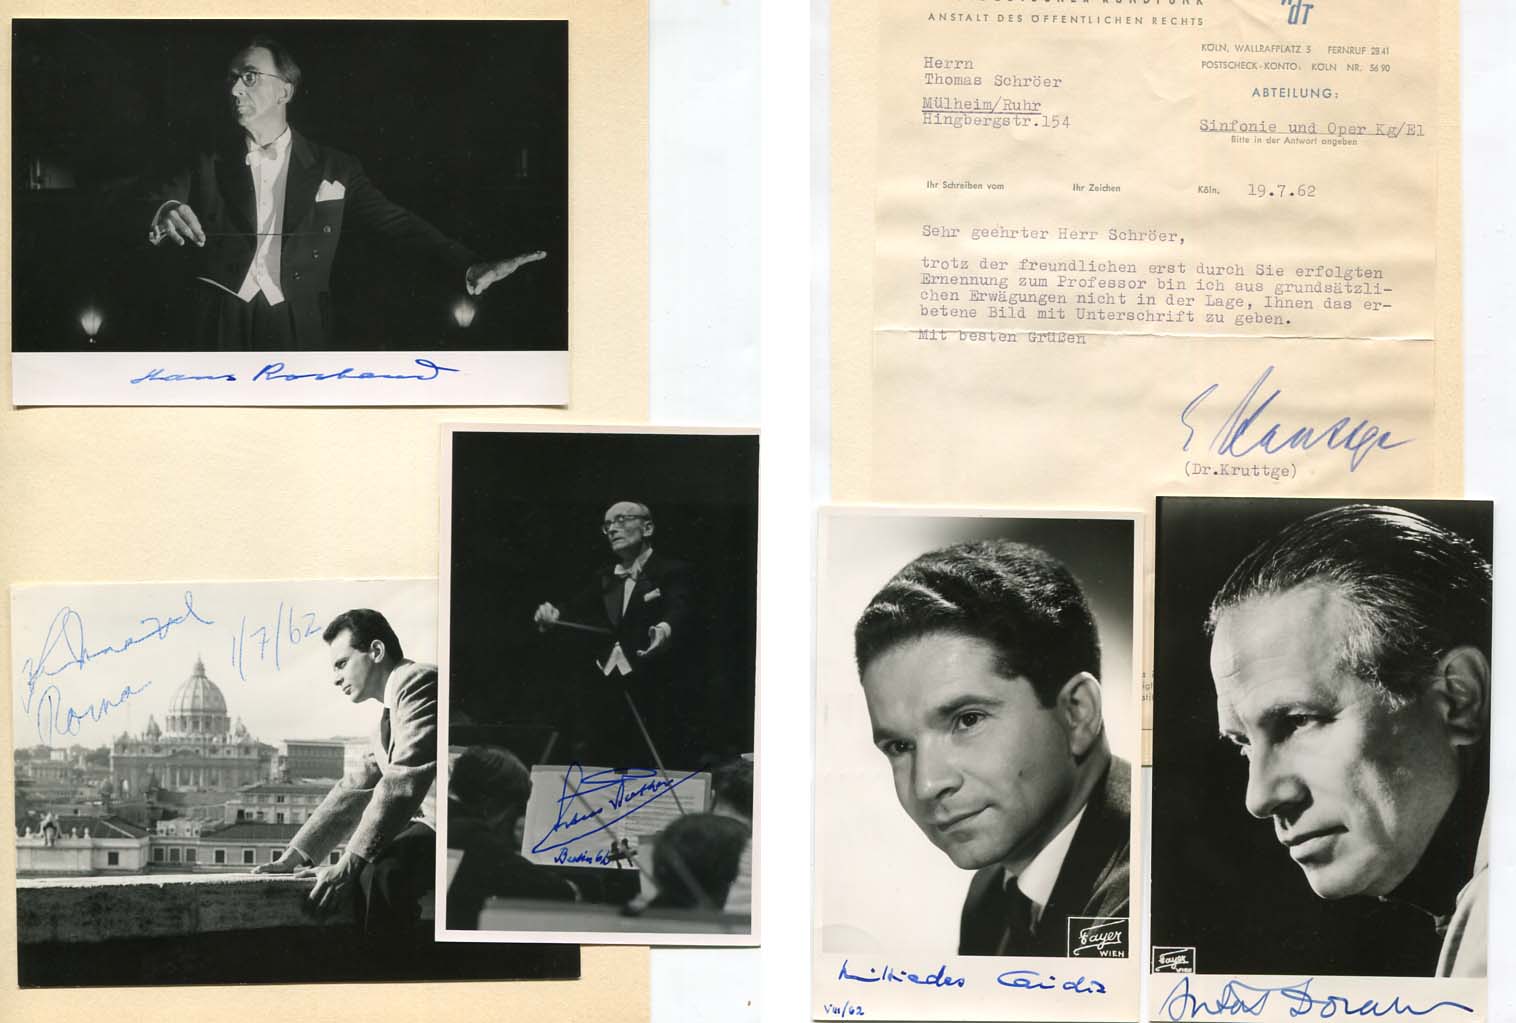  Conductors Collection II Autograph Autogramm | ID 7873998651541